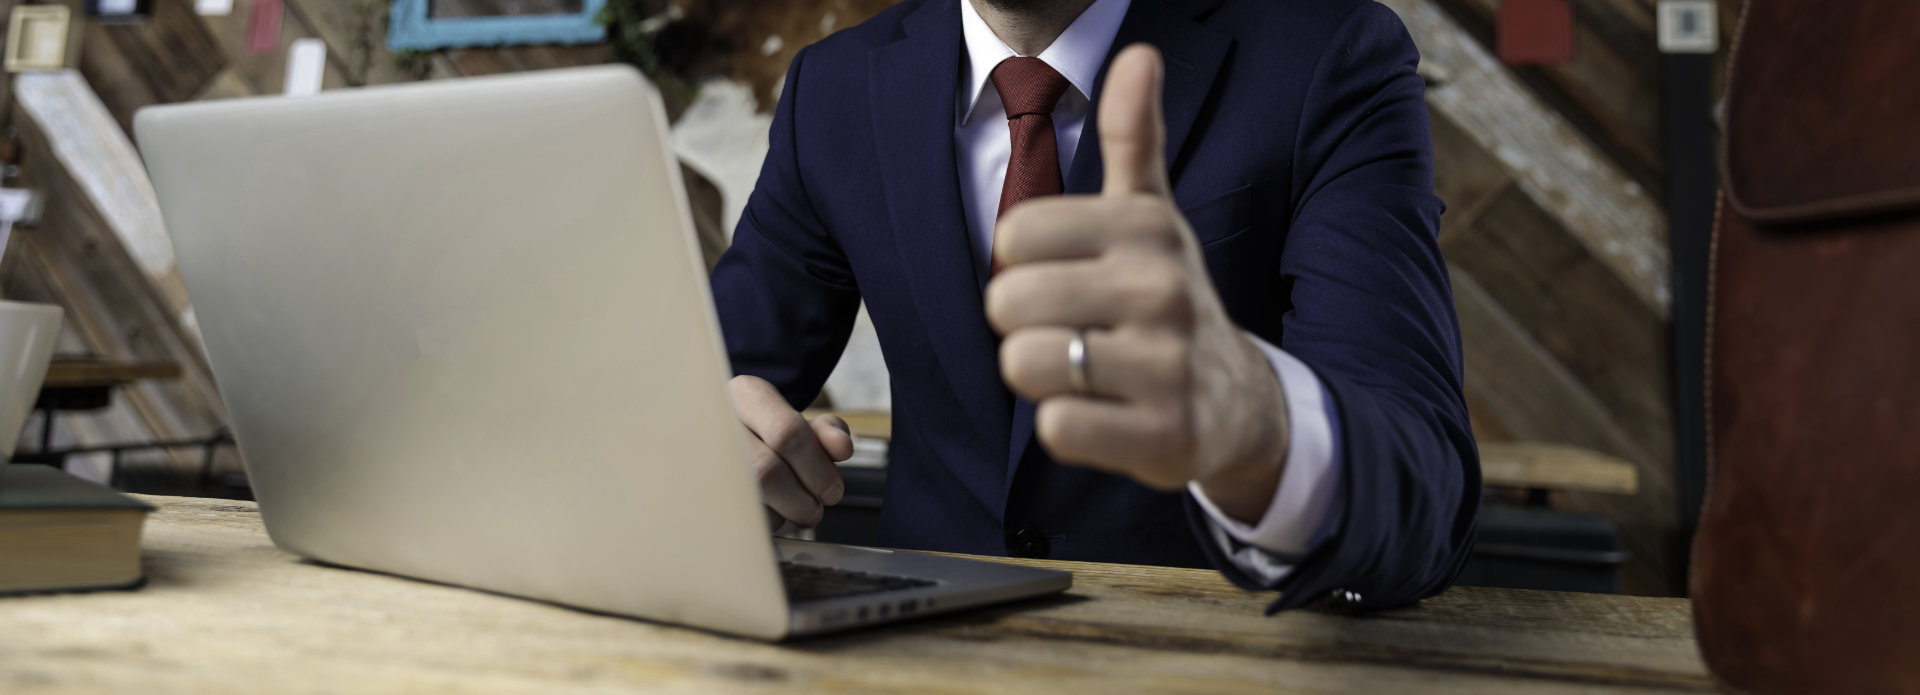 A businessman in front of his laptop showing his thumb up.